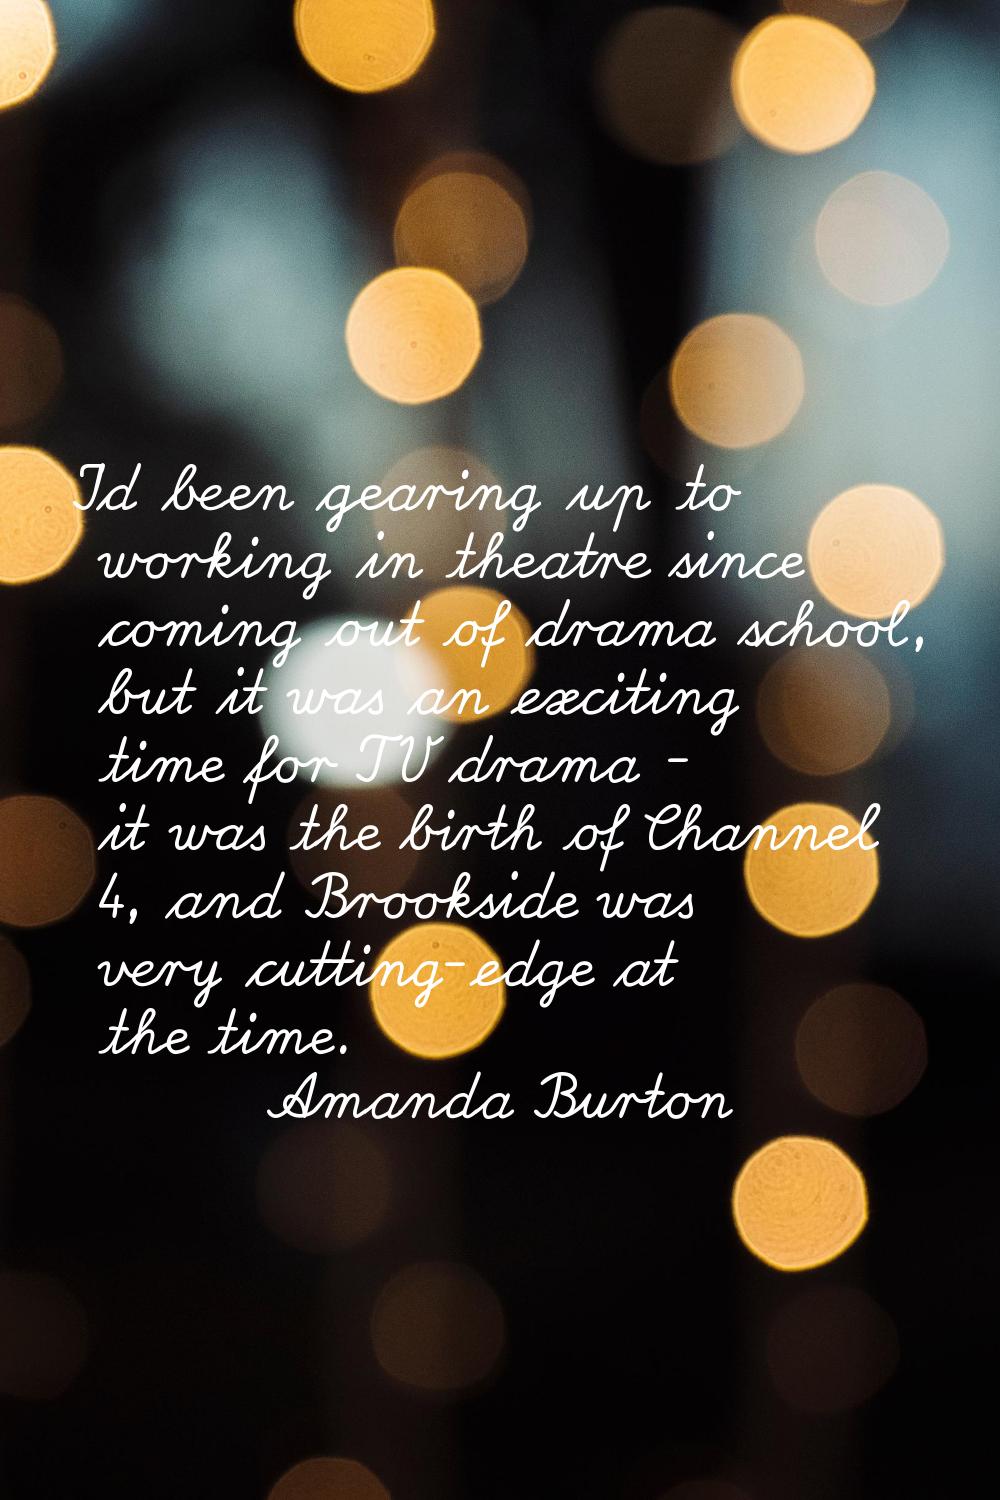 I'd been gearing up to working in theatre since coming out of drama school, but it was an exciting 